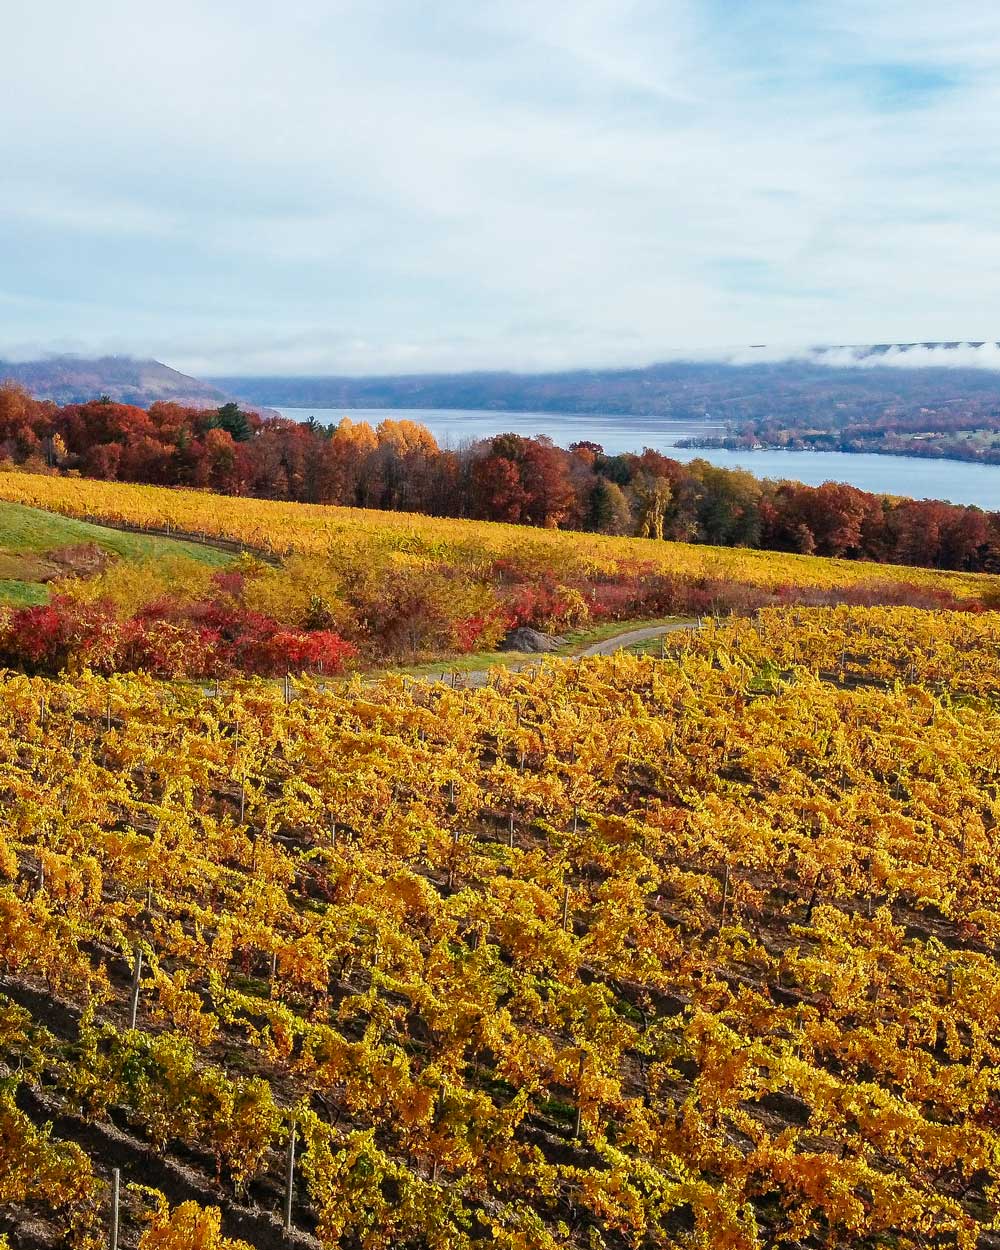 Vineyard overview of fall foliage.